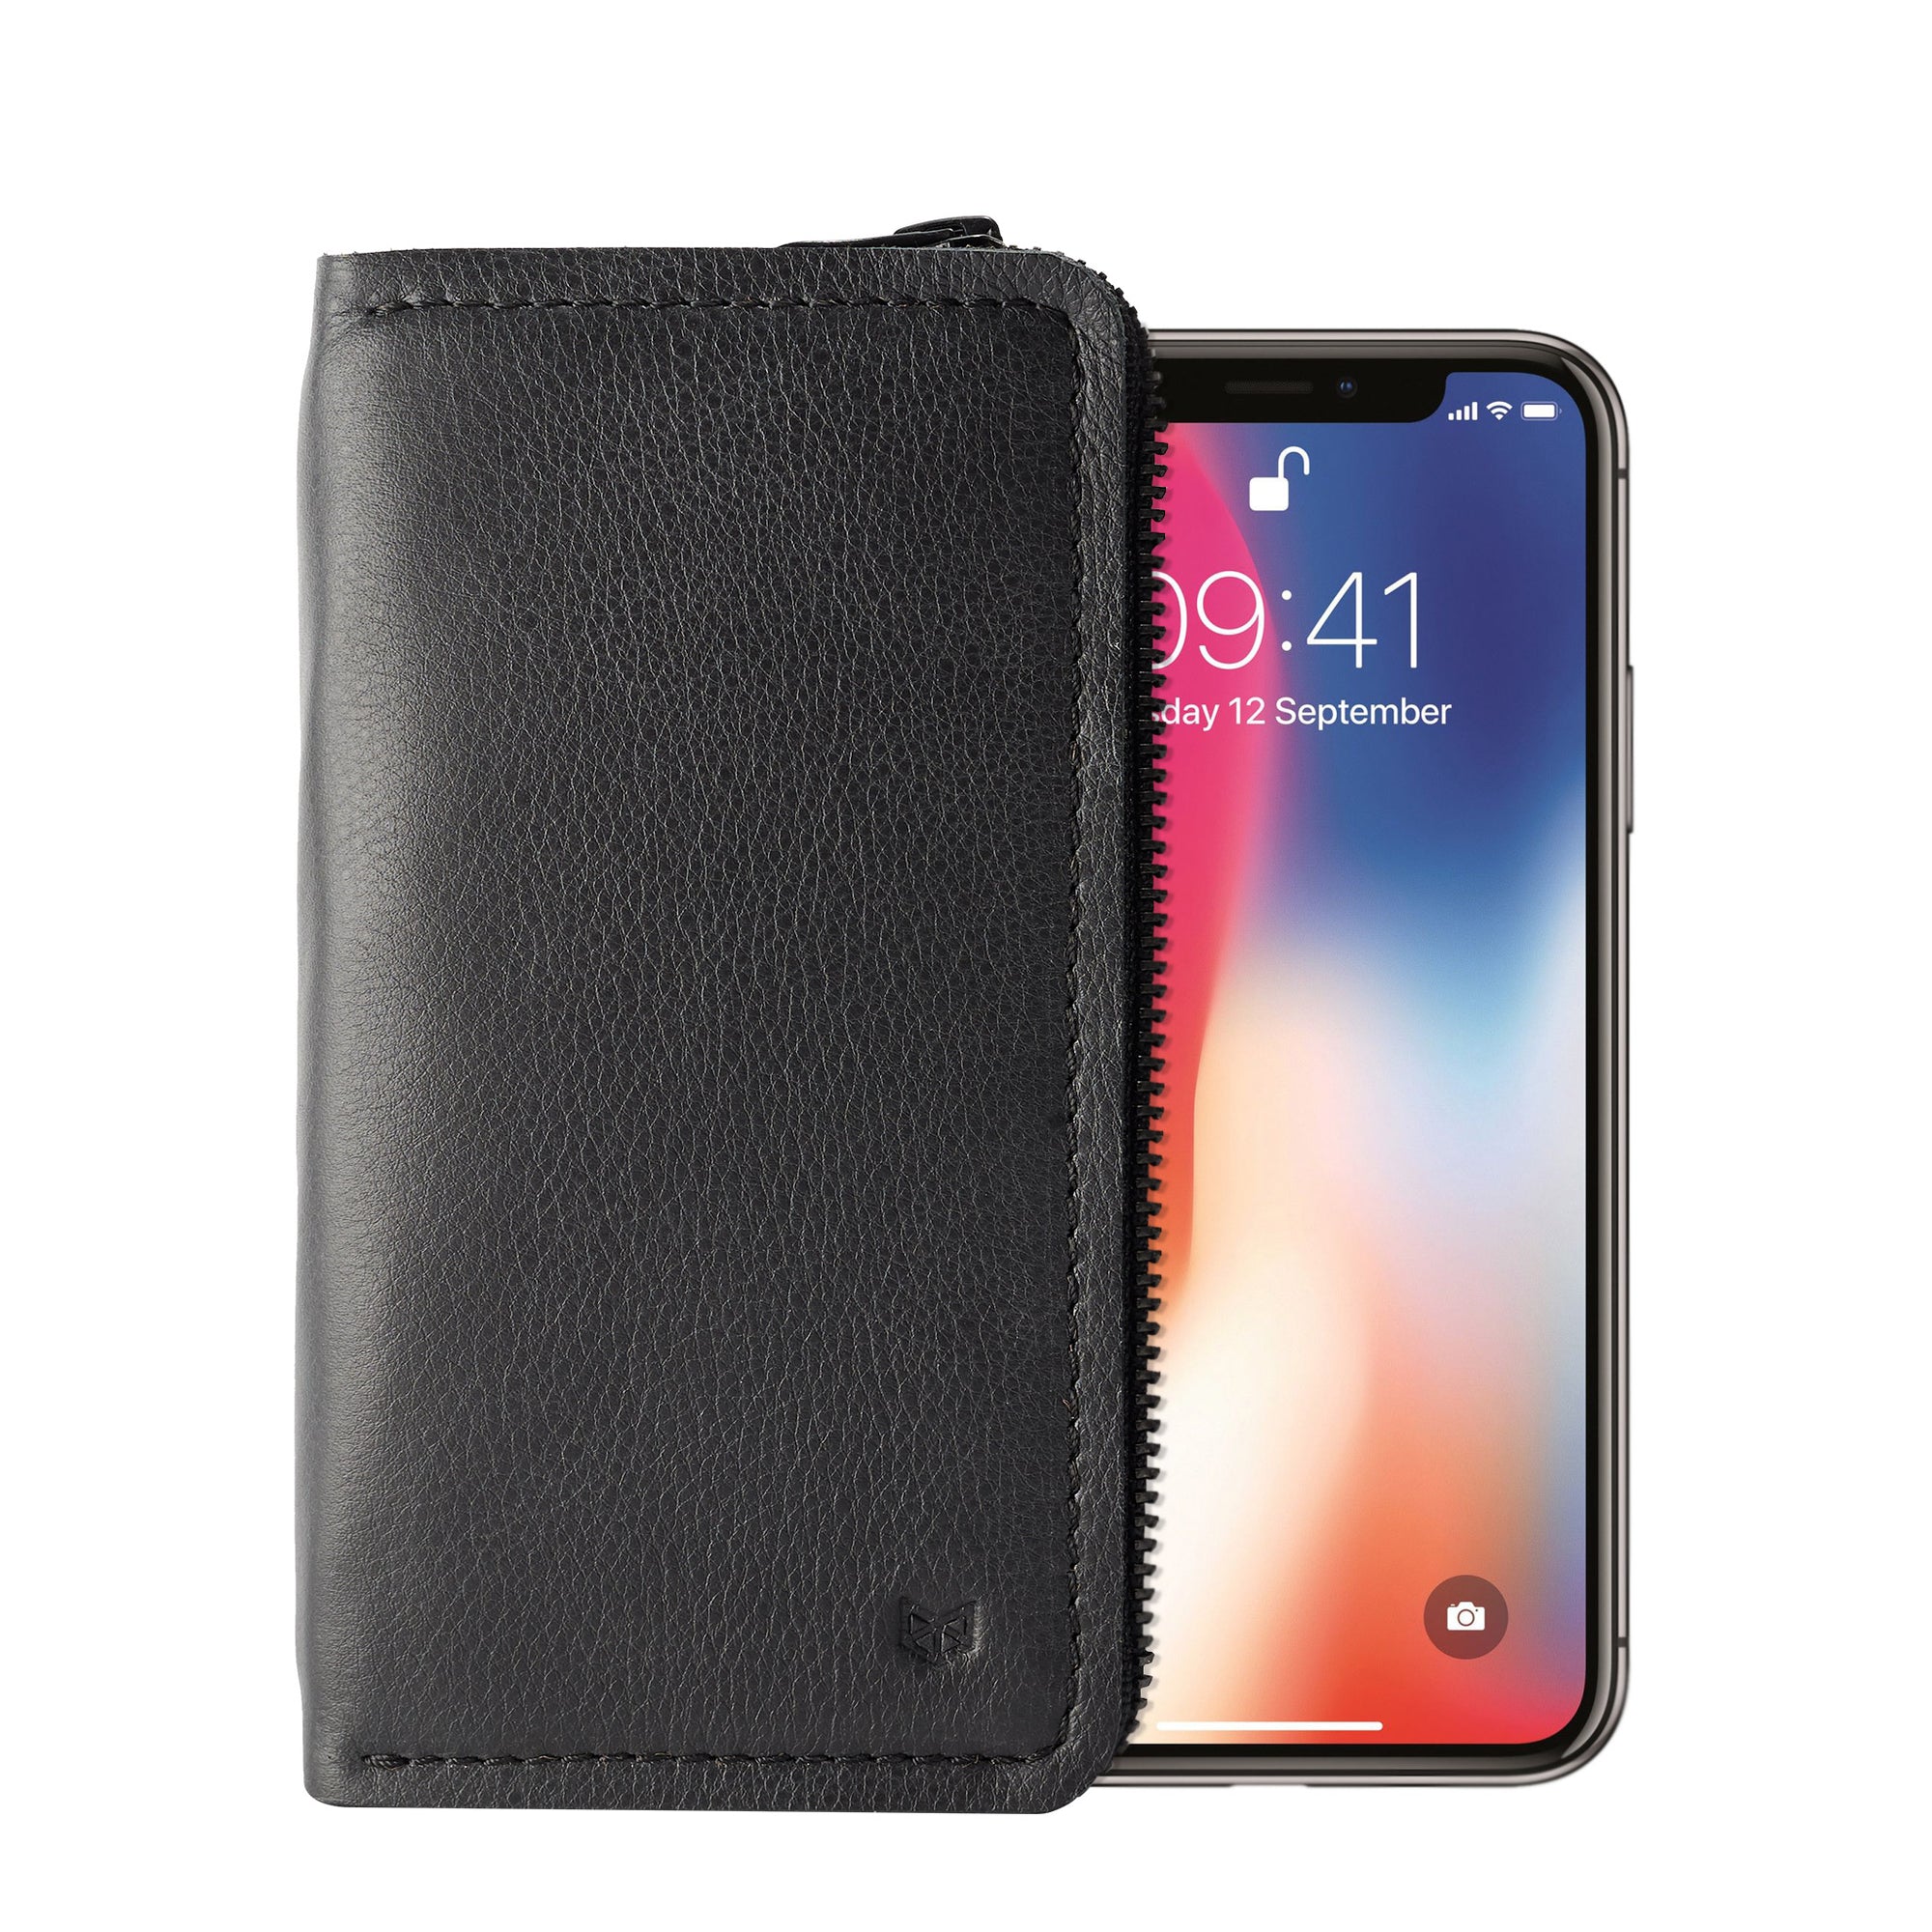 Black iPhone leather wallet stand case for mens gifts. iPhone x, iPhone 10, iPhone 8 plus leather stand sleeve